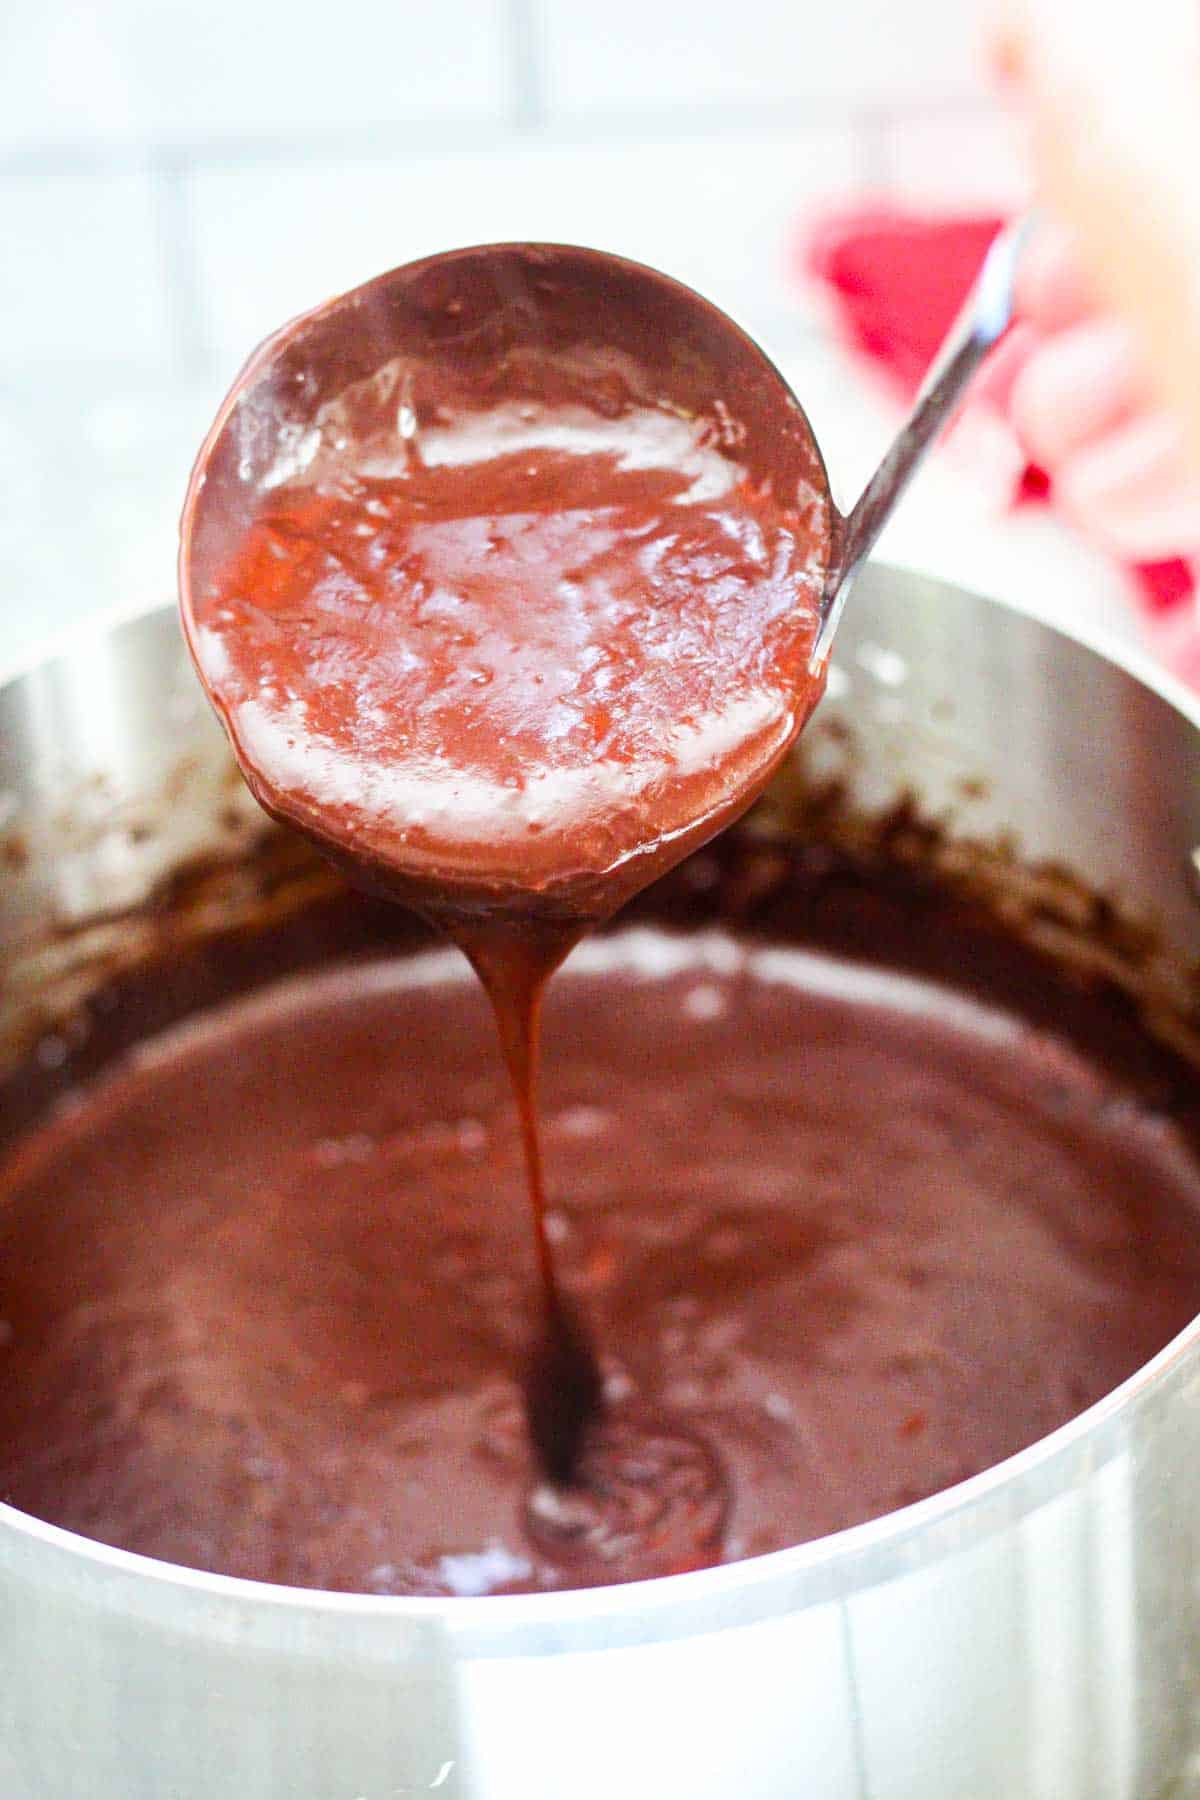 Chocolate pudding in the sauce pan, ready to pour into serving cups. Picture shows a ladle pouring the chocolate pudding back into the saucepan, almost like dripping from ladle just to show consistency of pudding.